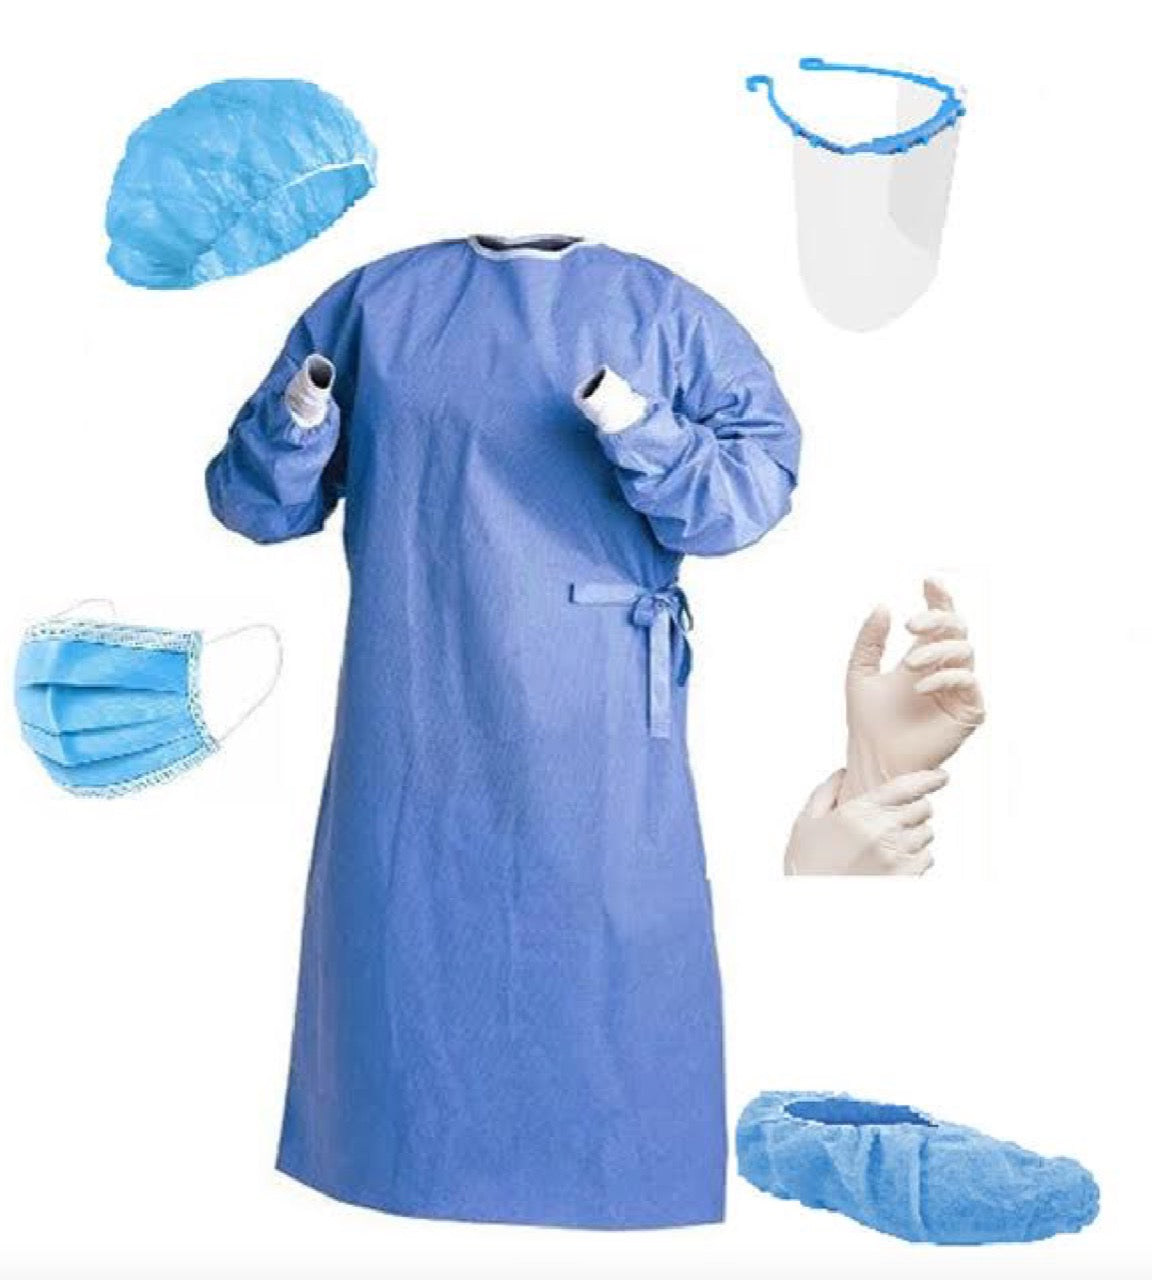 Surgeon Gown PPE Kit at wholesale prices with door delivery globally